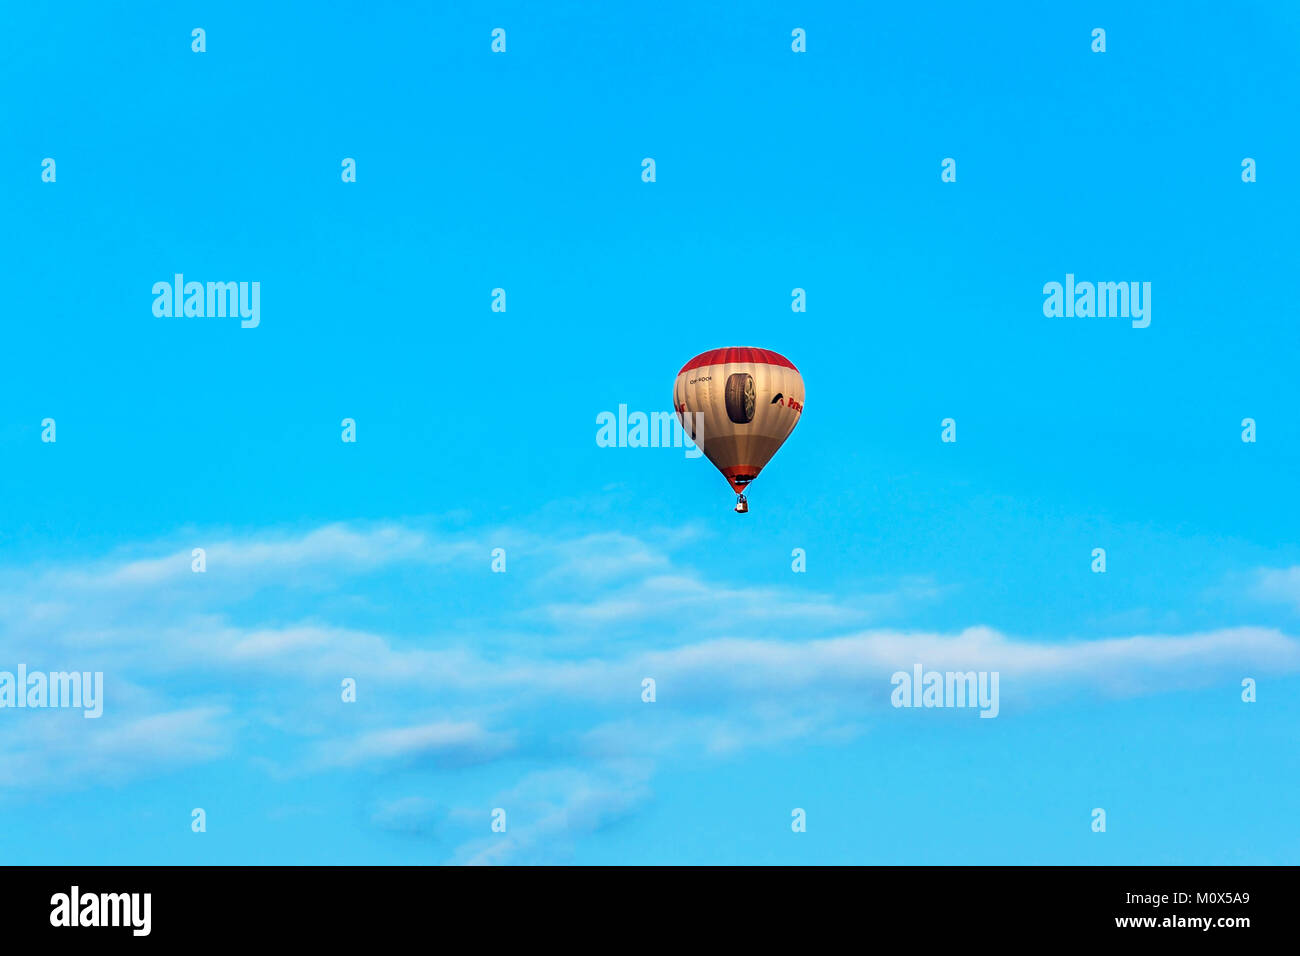 Minsk, Belarus - September 10, 2017: balloon against blue sky and clouds Stock Photo